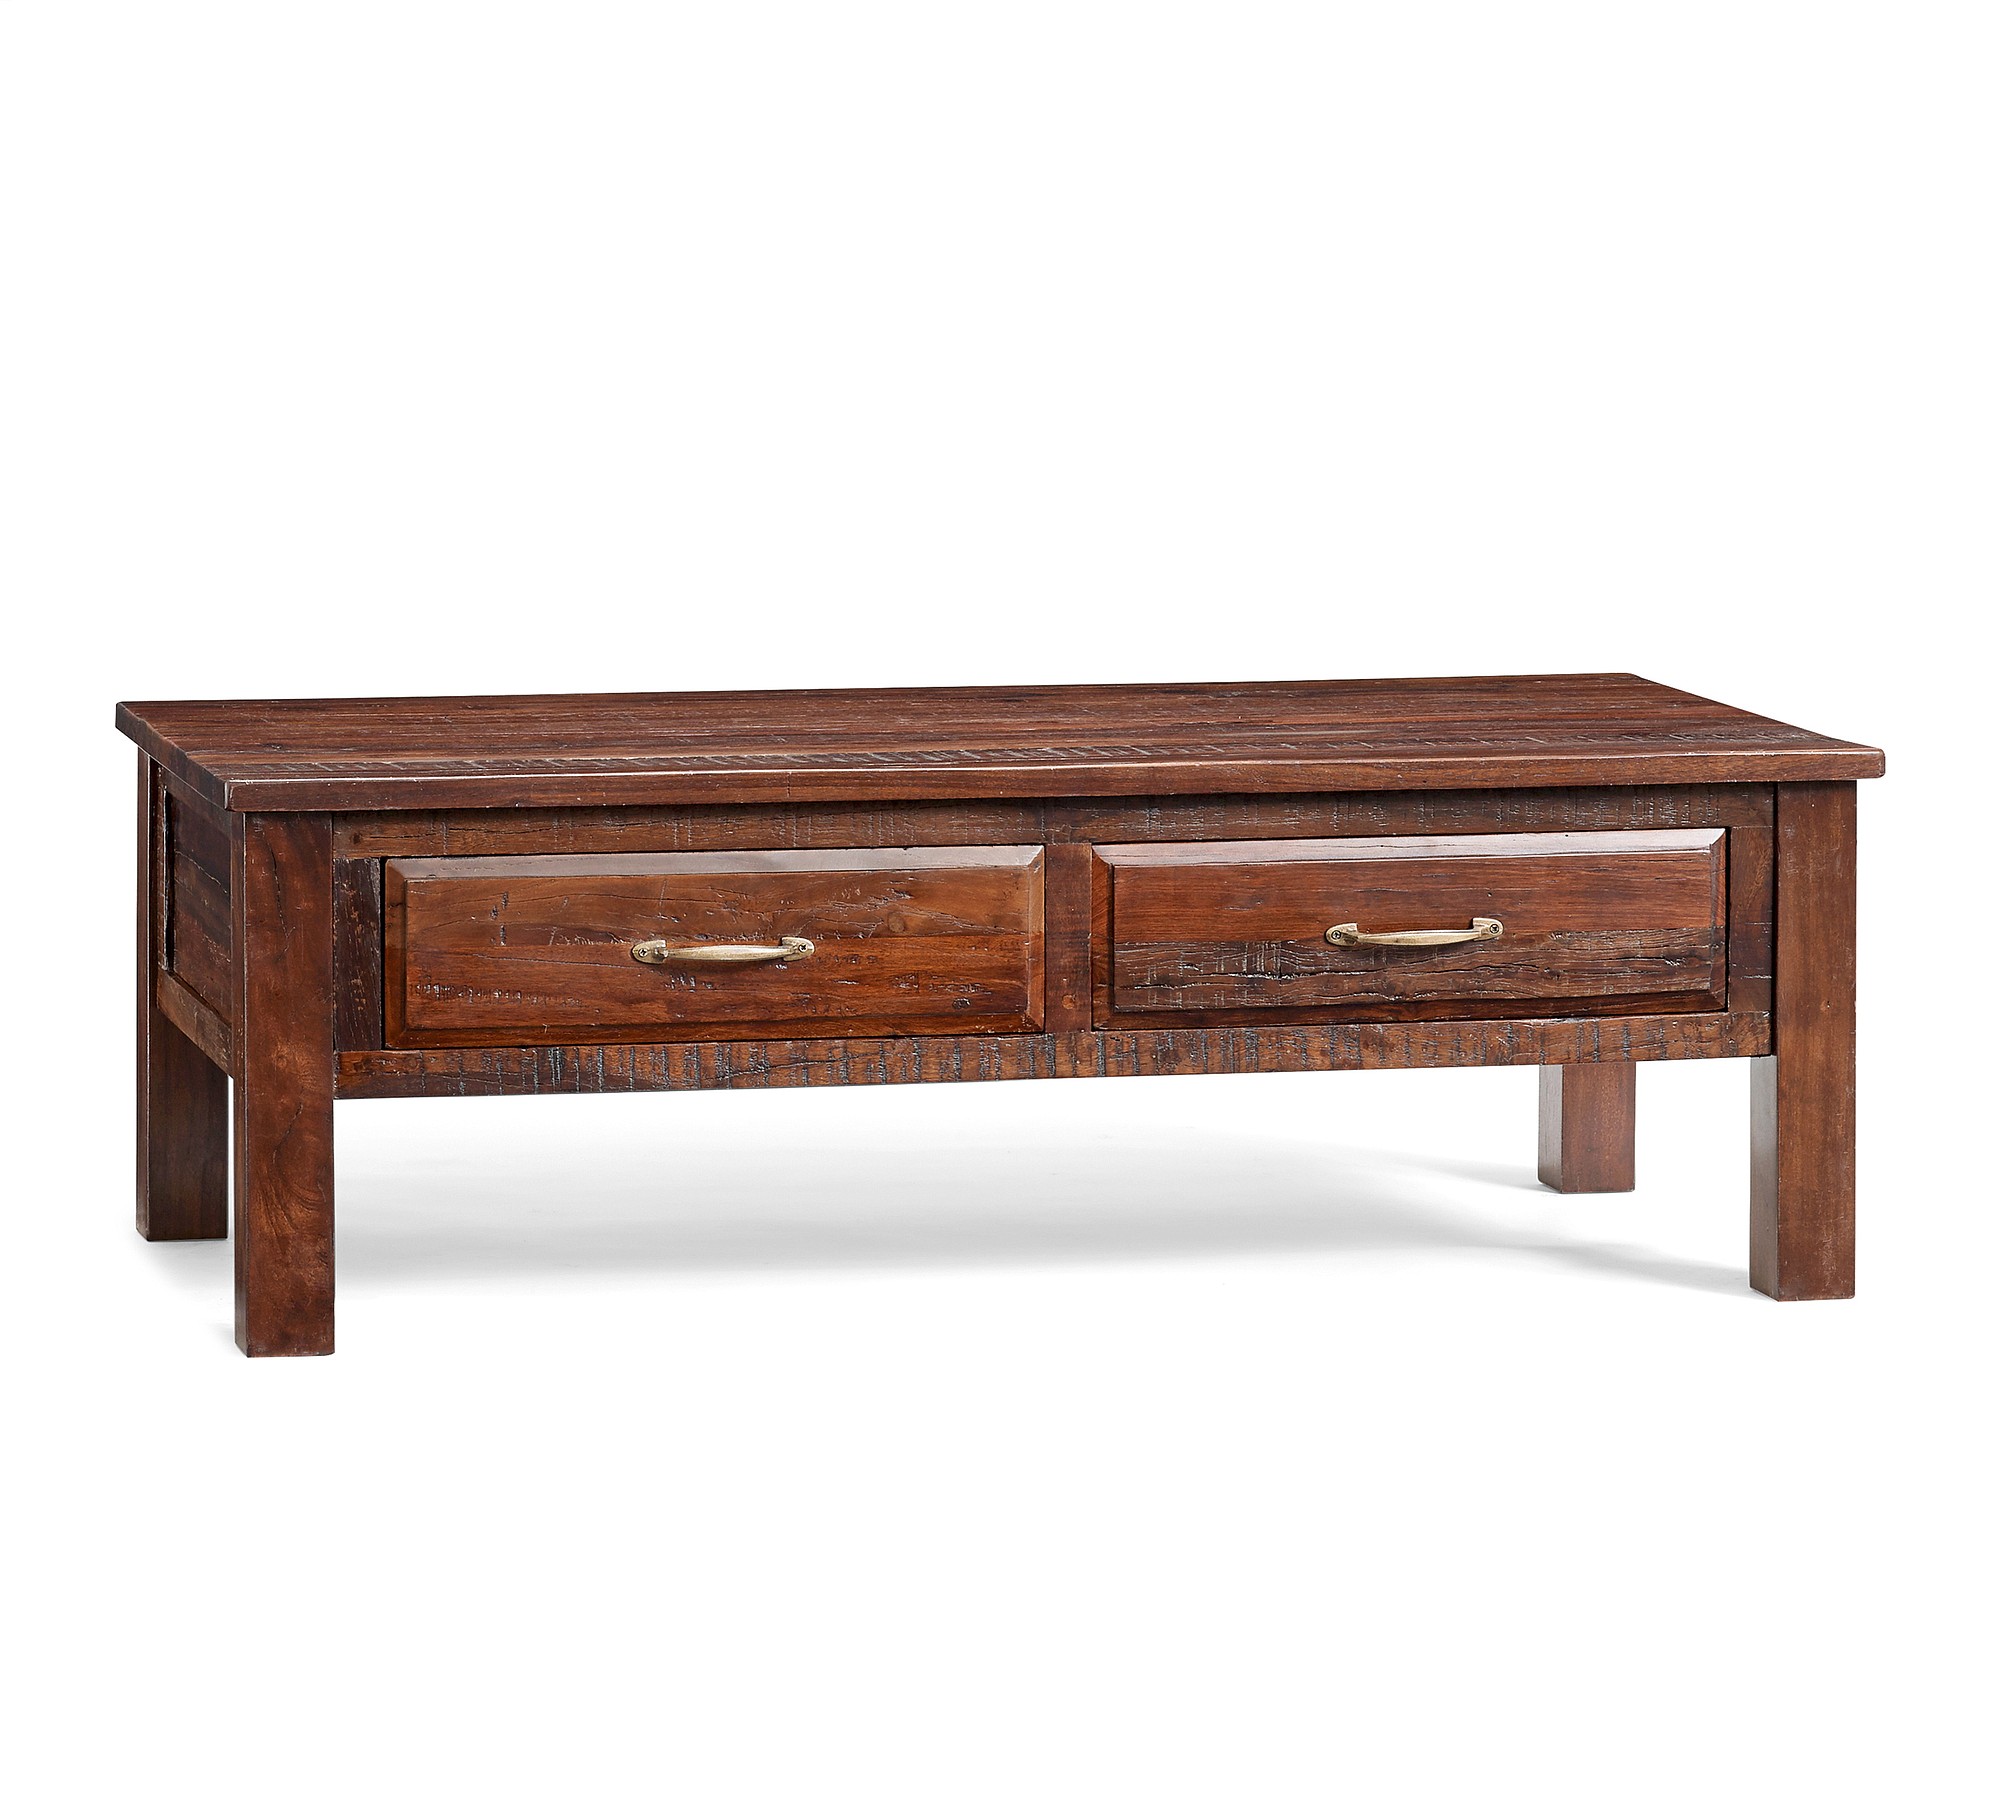 This photo provided by Pottery Barn shows a reclaimed wood coffee table that is part of the new Bowry collection. Each piece is made of reclaimed wood, which is an increasingly popular material for furniture.